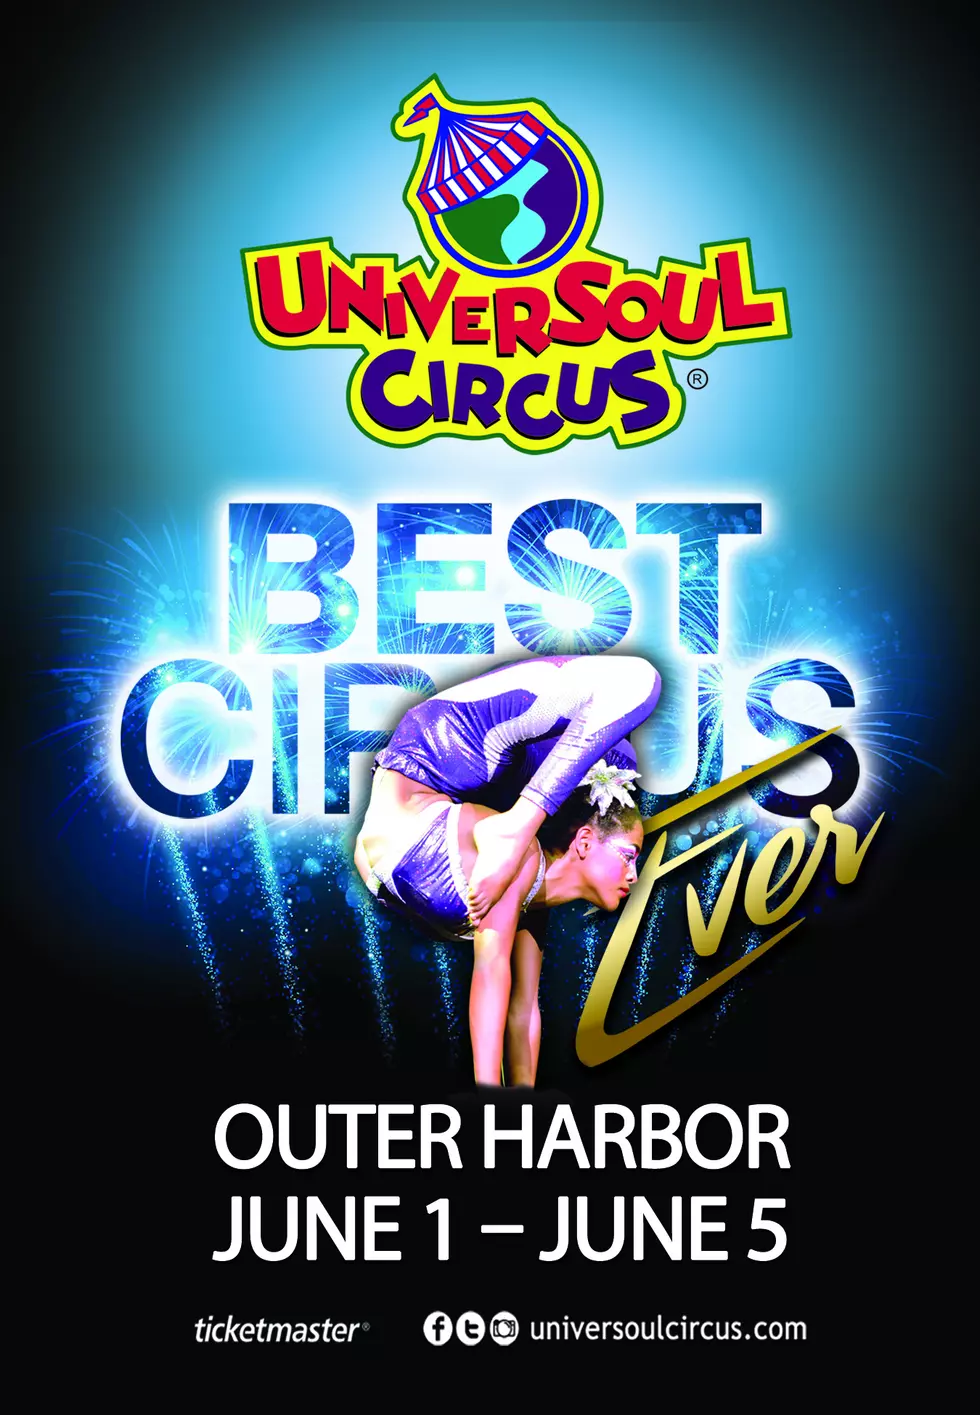 Universoul Circus Is Coming to Town